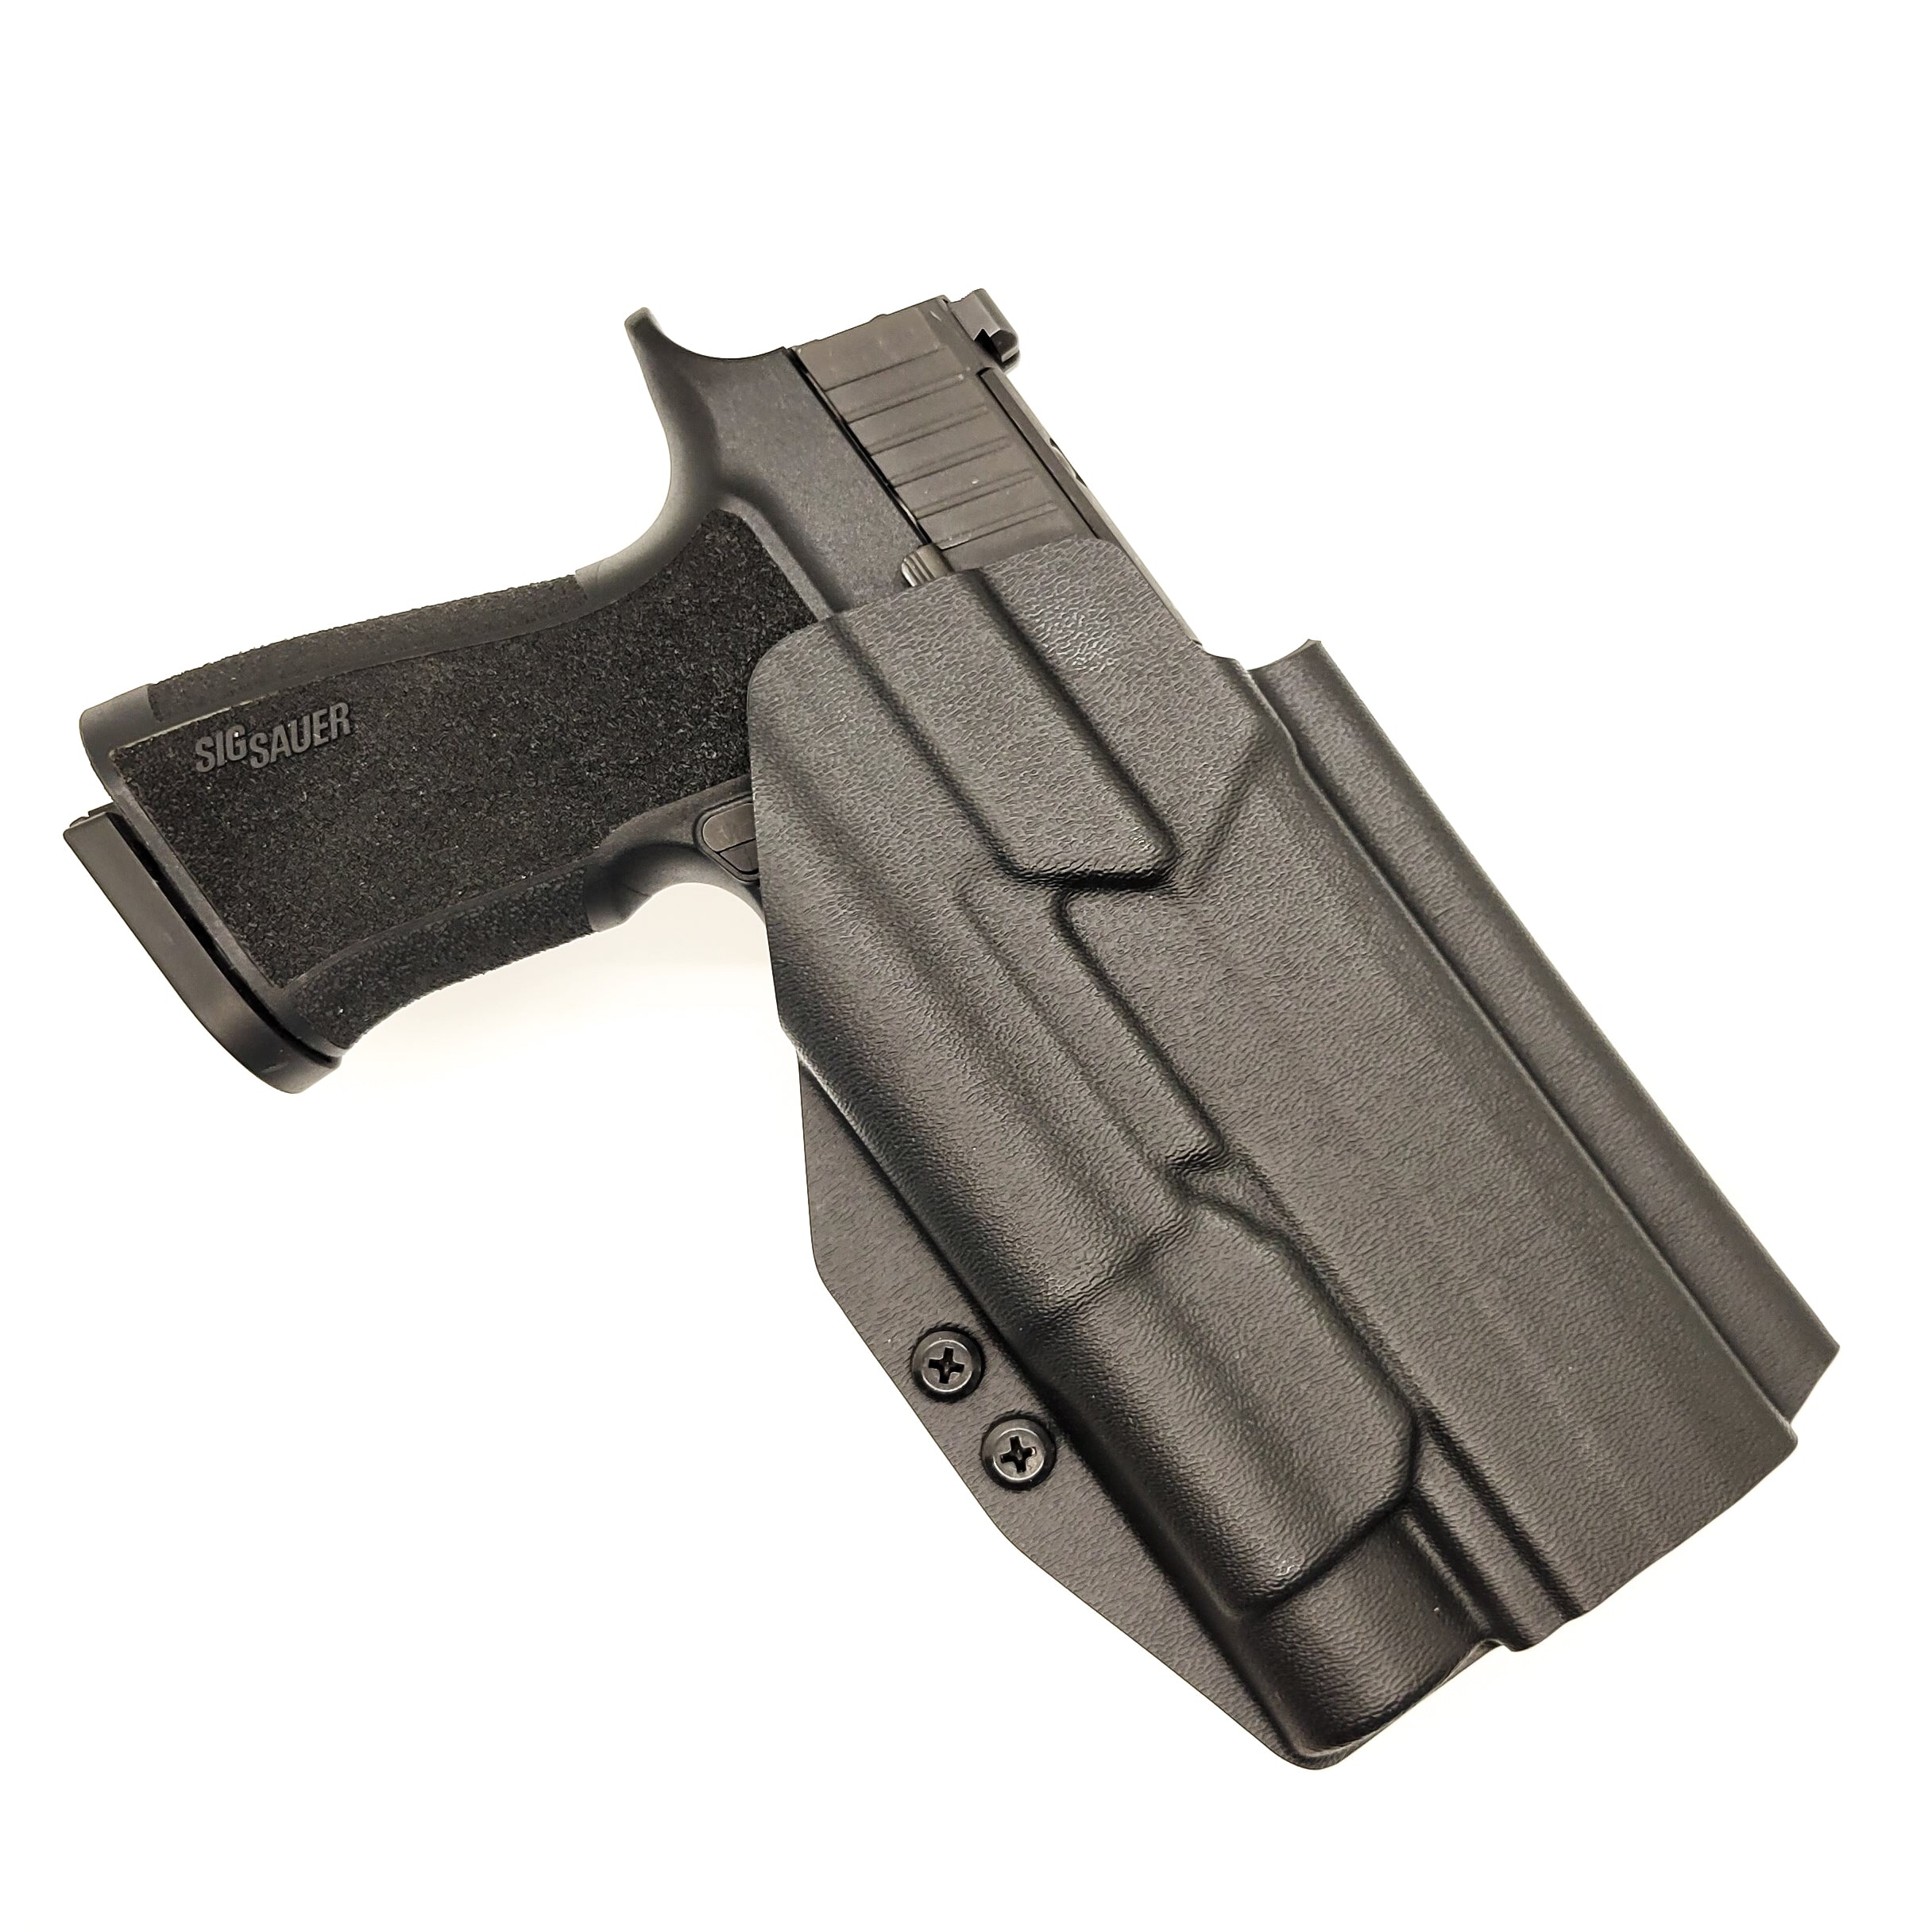 Outside Waistband Taco Style Kydex Holster designed to fit the Sig Sauer P320-XTEN with the Streamlight TLR-1 or TLR-1 HL attached to the pistol. Open Muzzle, Full Sweat Guard, Adjustable Retention. Profile cut to allow red dot sights optics on the pistol. Made in the USA.  P 320 XTen X Ten X10 X 10 10MM 